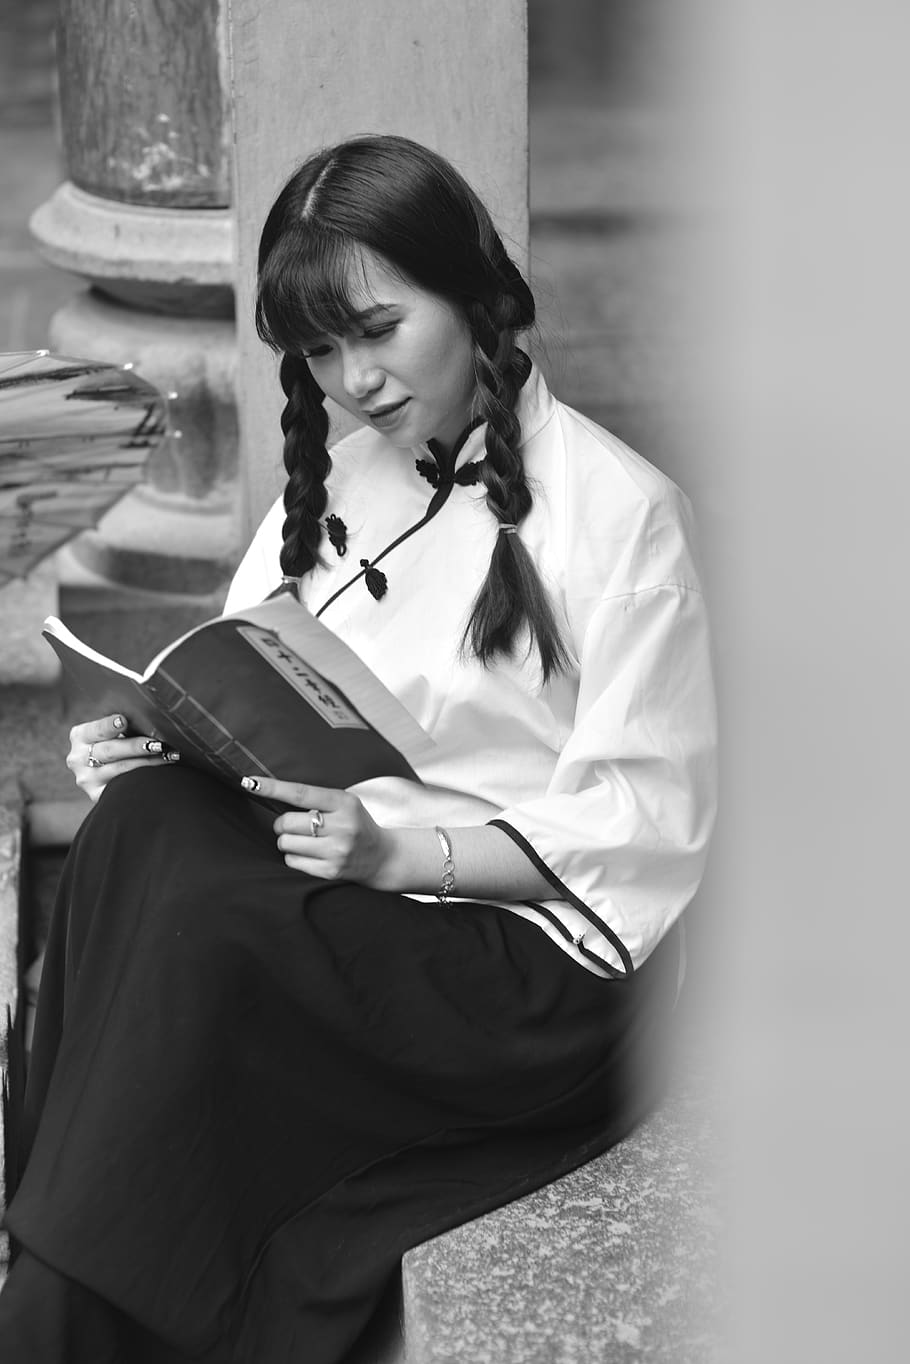 costume, china, sour, books, people, page, come, young, nice, female